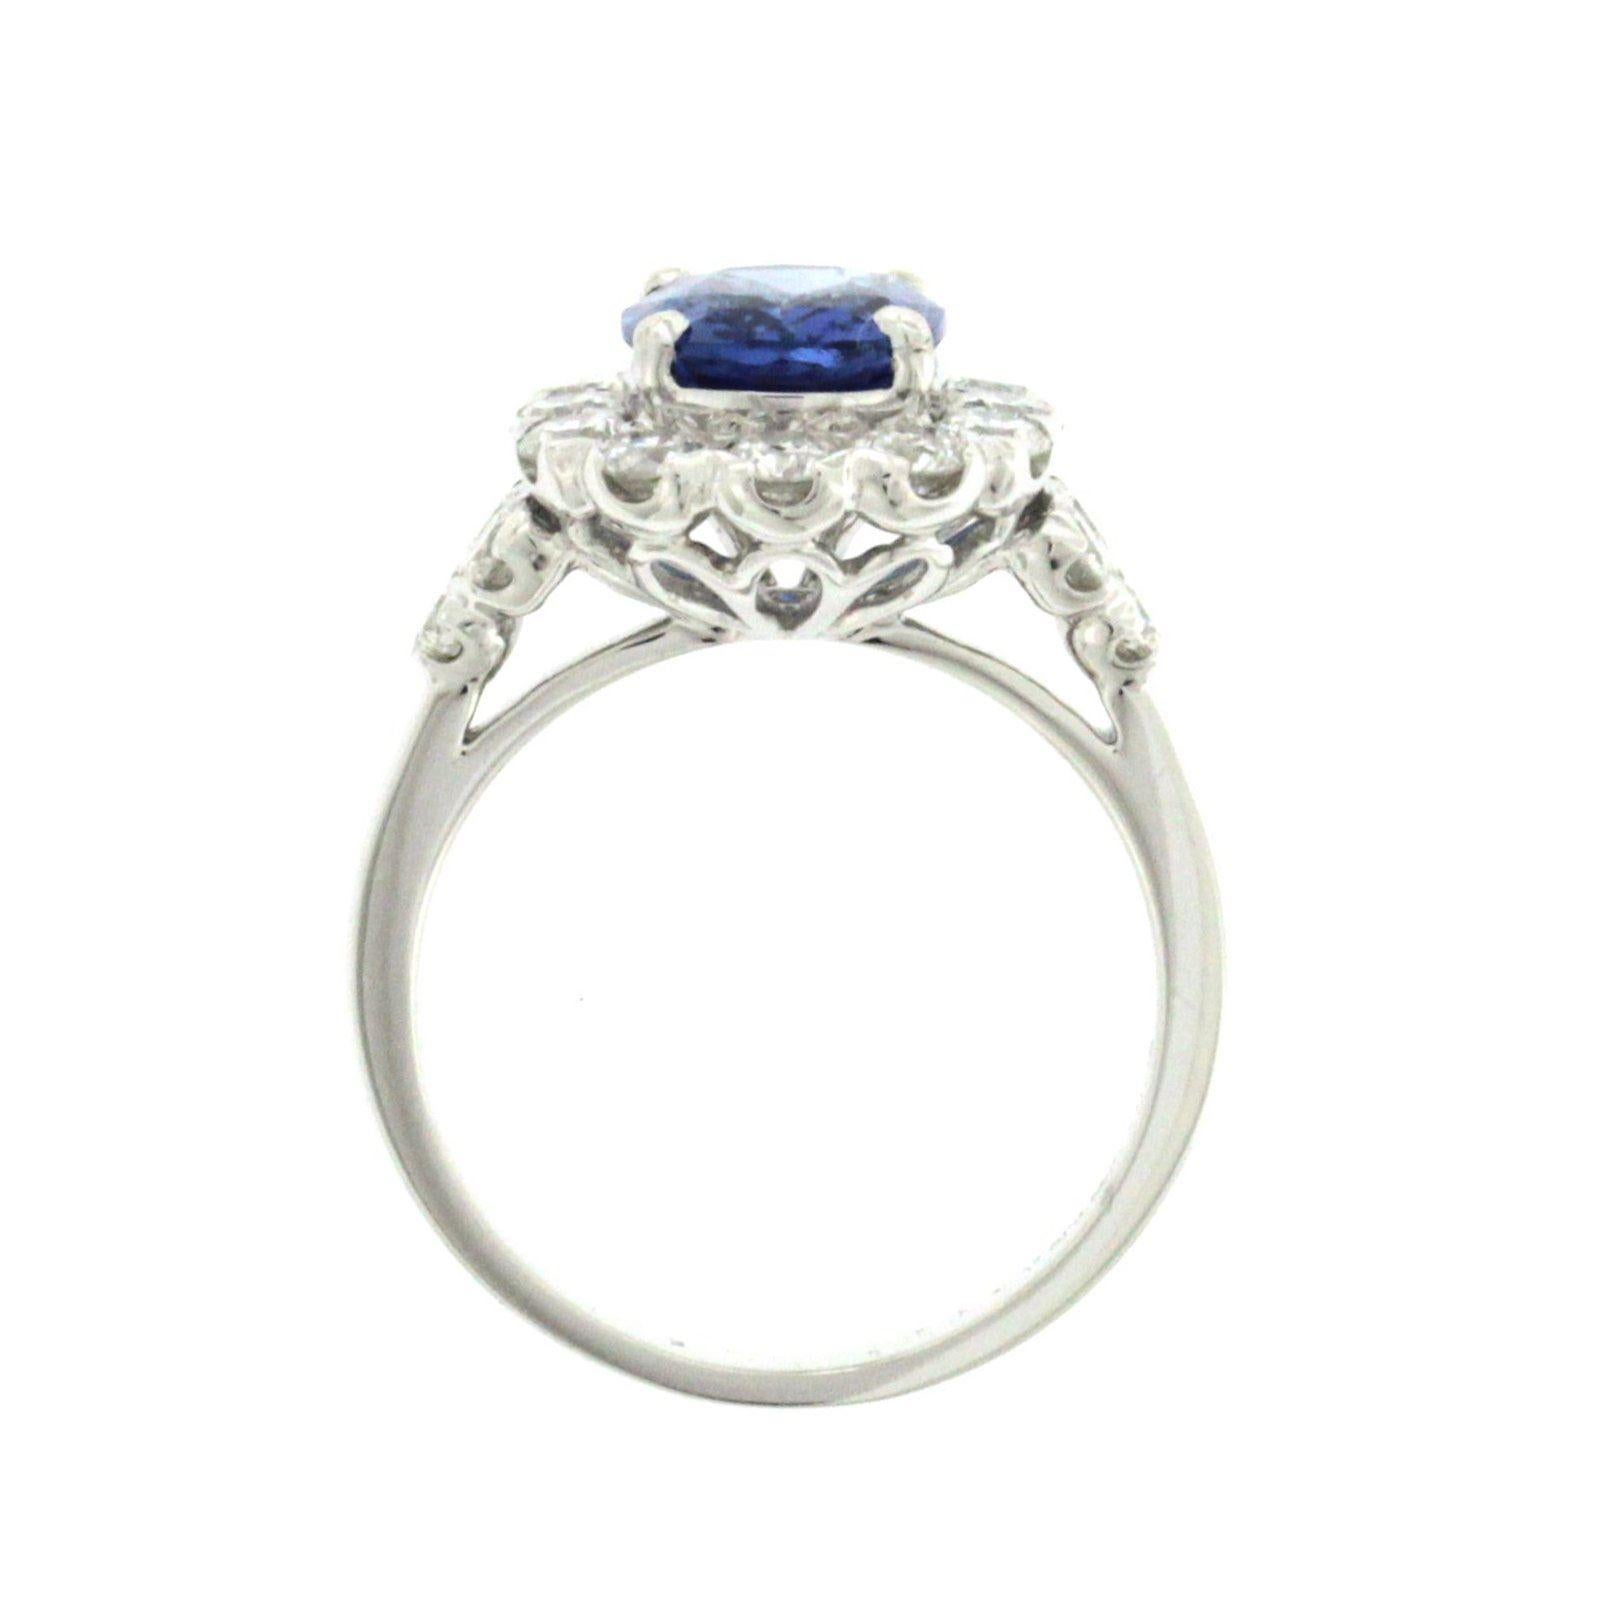 White 3 Ct Ceylon Sapphires & 1.48 Ct Diamonds In 18k Gold Engagement Ring For Sale 2